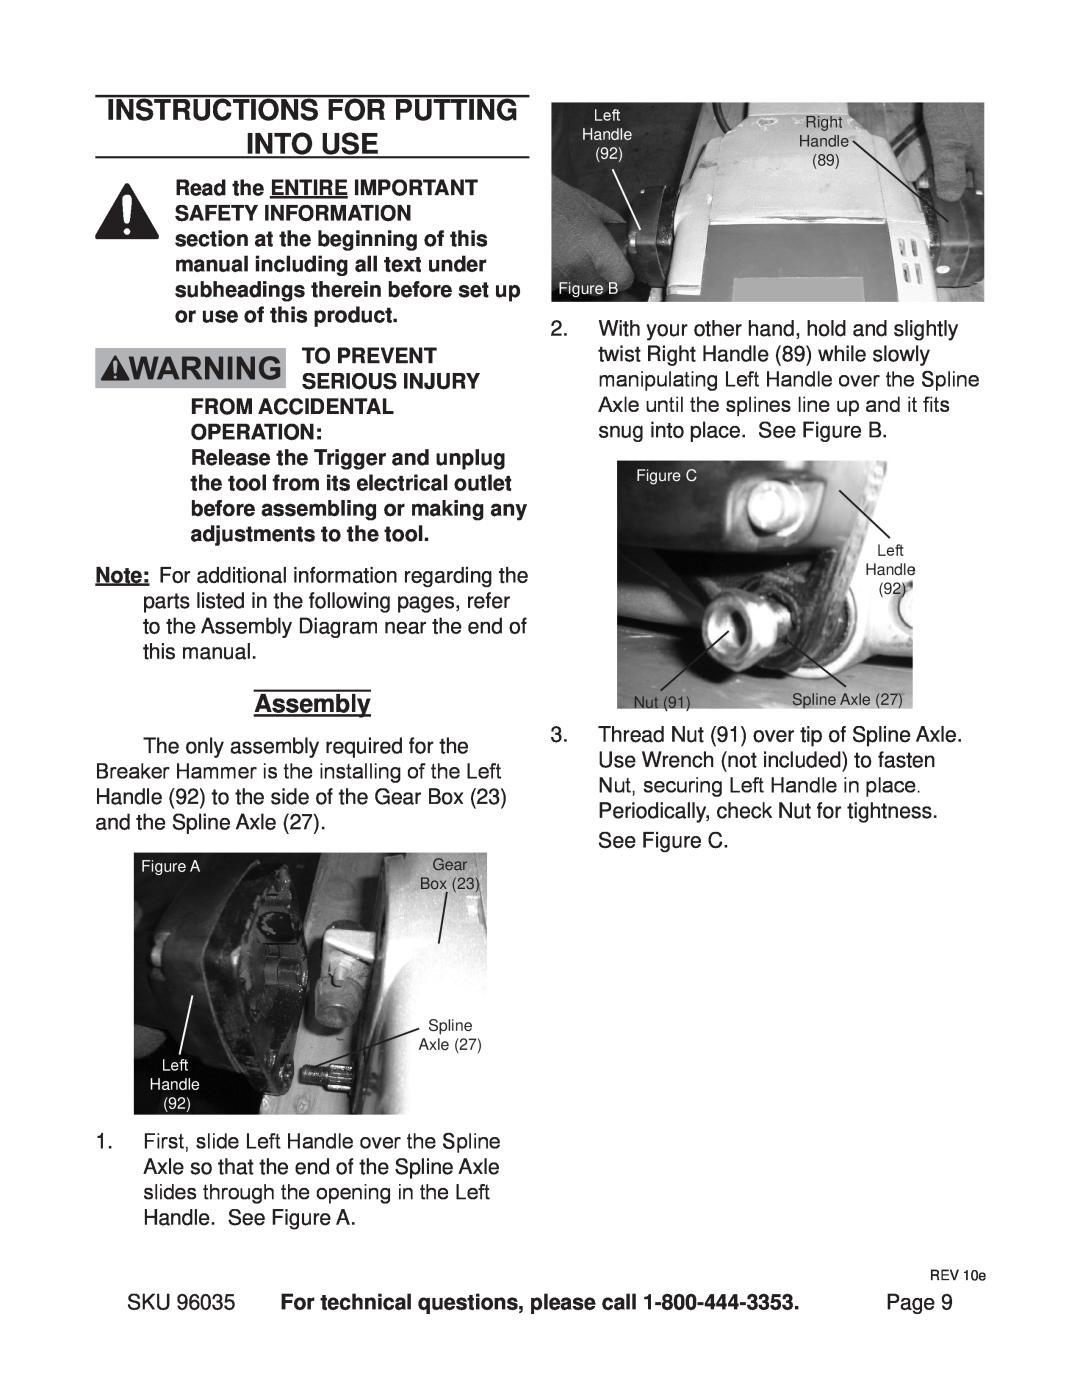 Chicago Electric 96035 operating instructions Instructions for putting into use, Assembly 